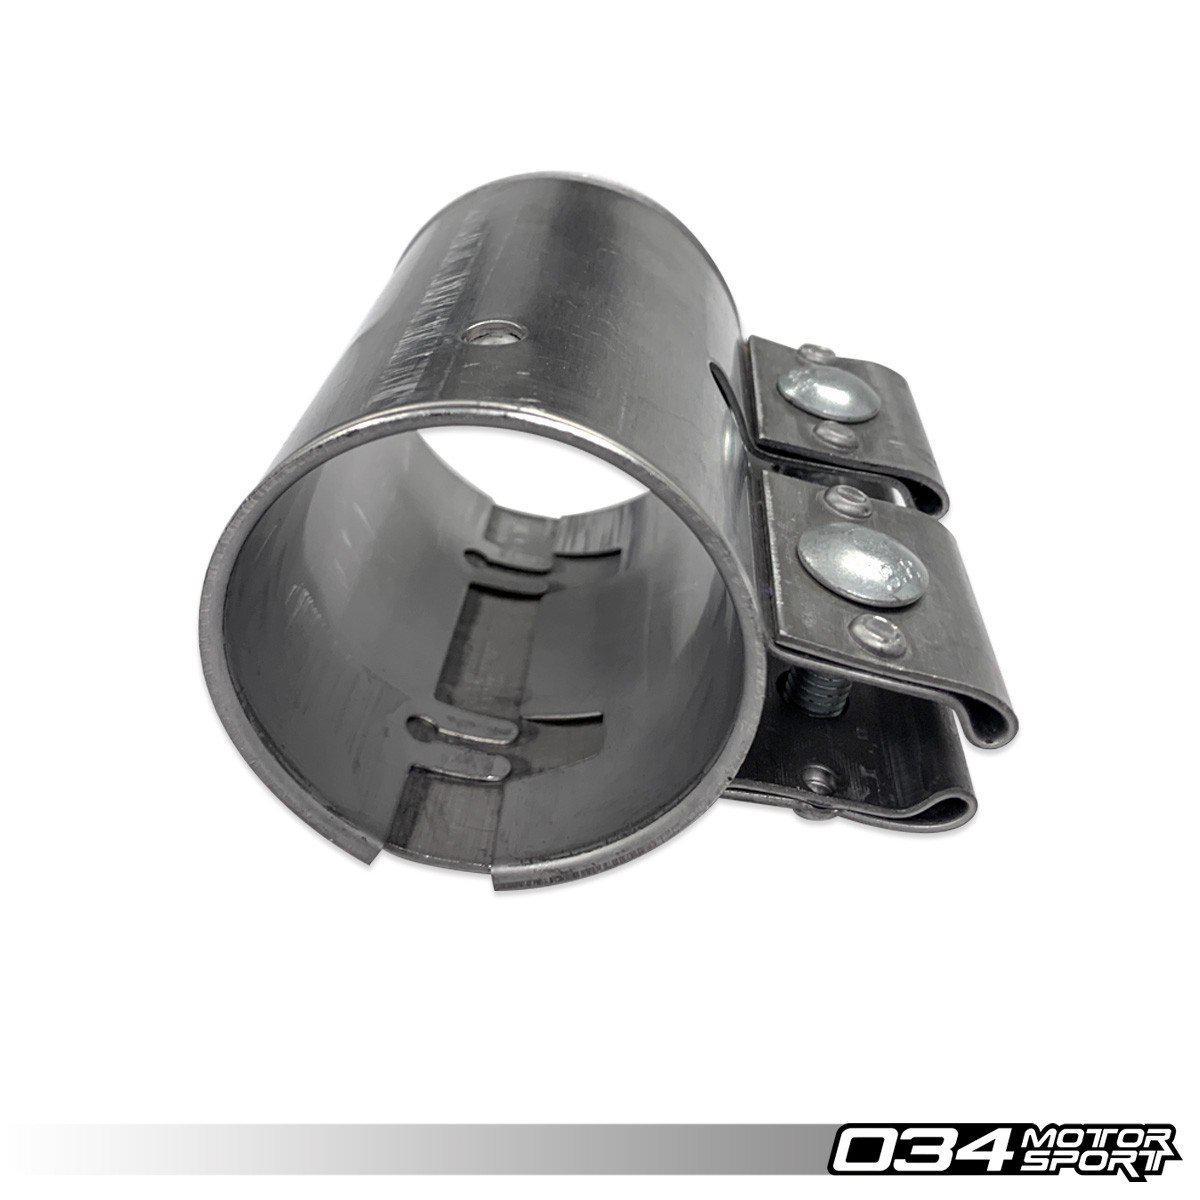 70mm Exhaust Clamp For Audi 8V A3/S3, 8S Tts, And Vw MKVII Golf R-A Little Tuning Co